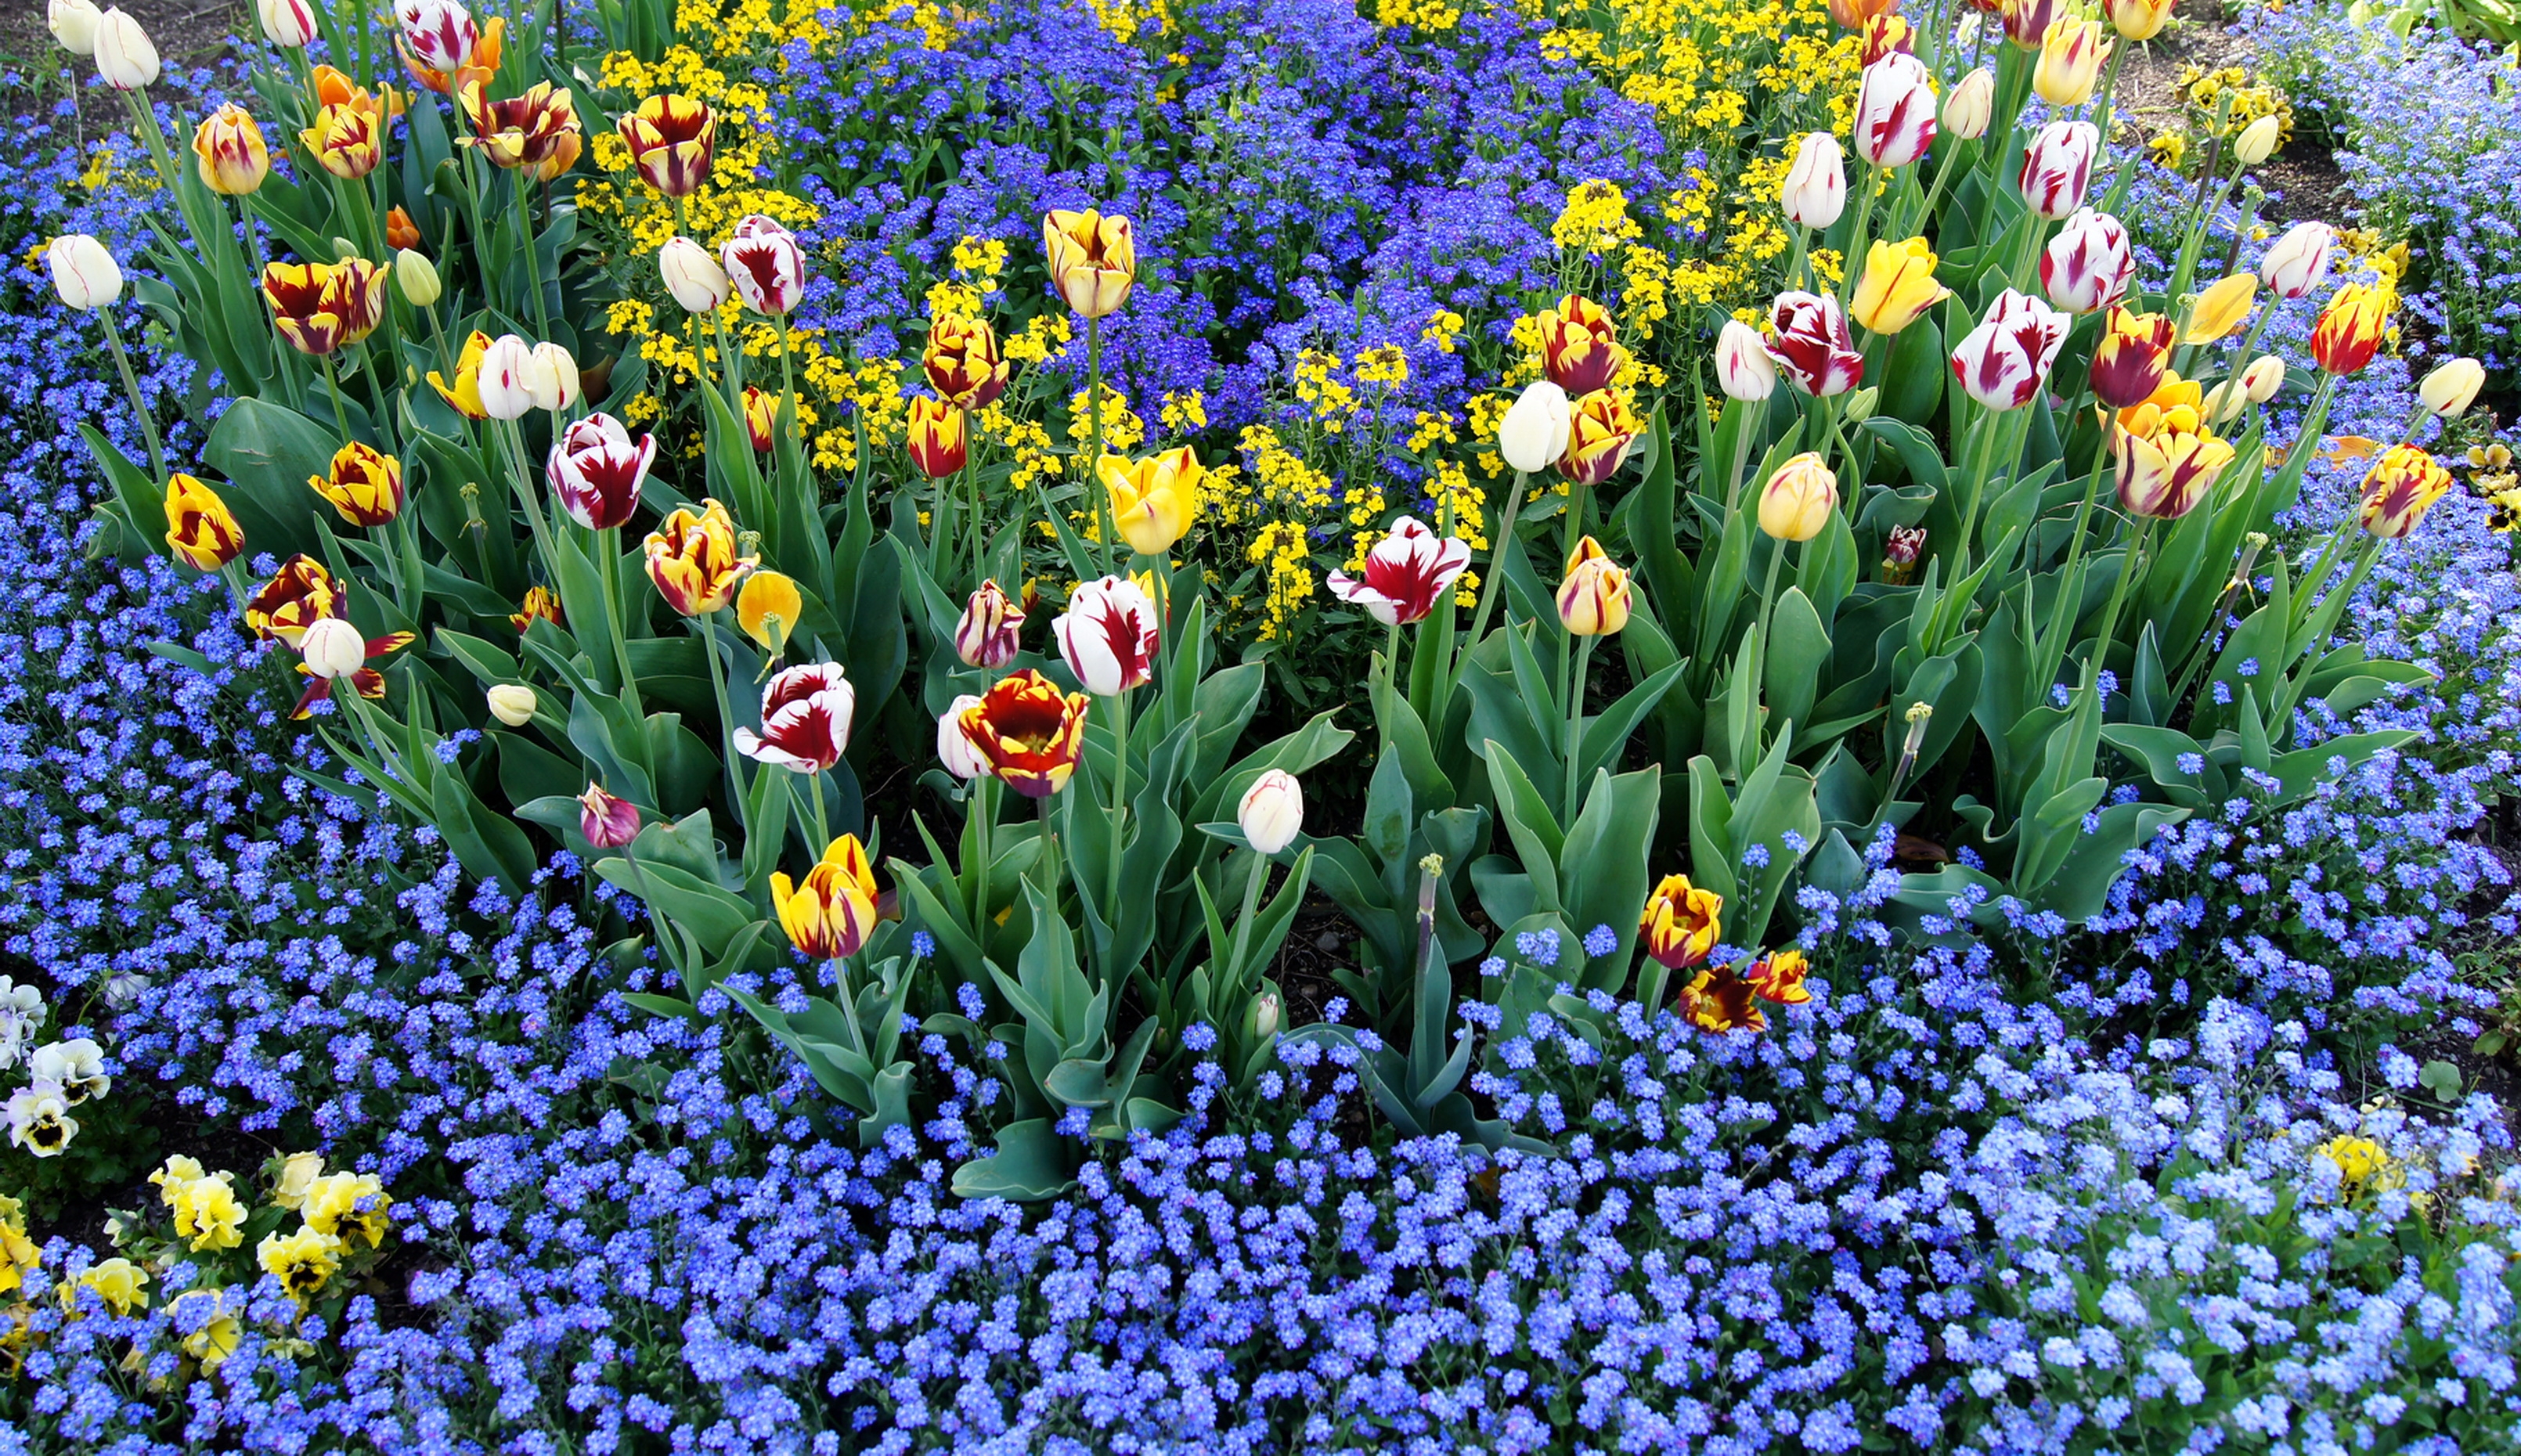 flower bed, flowerbed, flowers, tulips, pattern, small, different